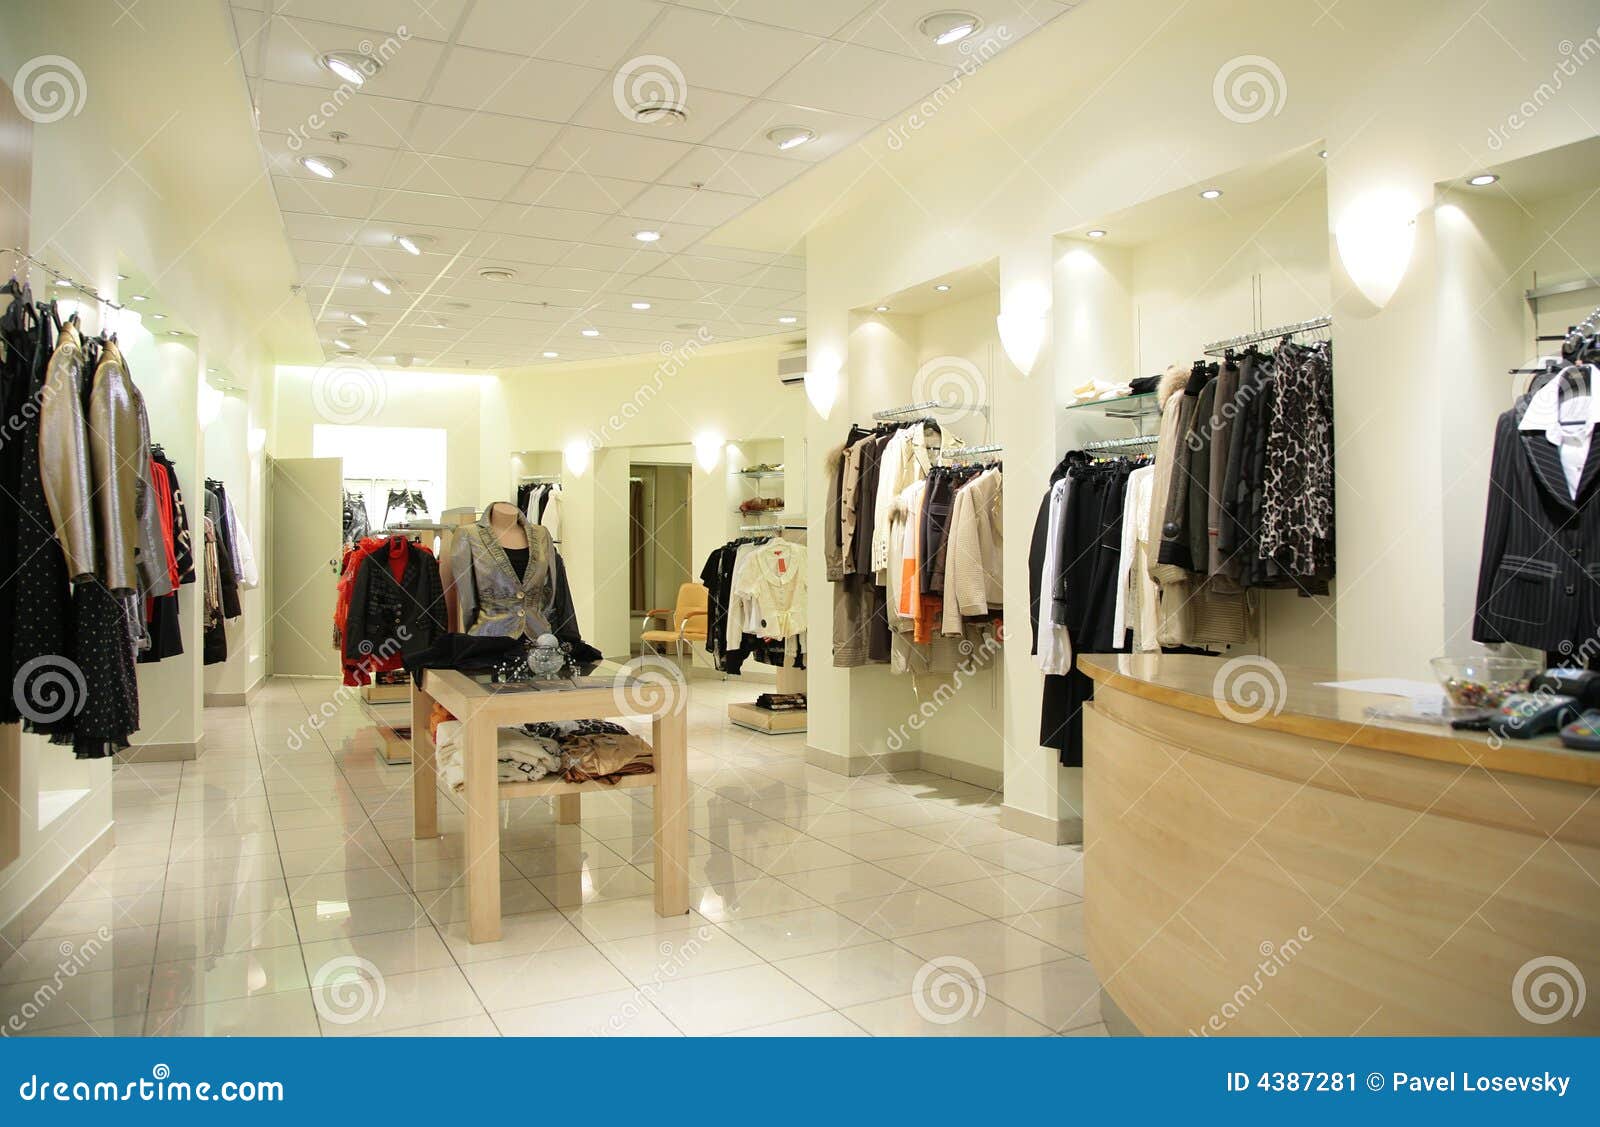 7,984 Shop Women's Clothing Stock Photos - Free & Royalty-Free Stock Photos  from Dreamstime